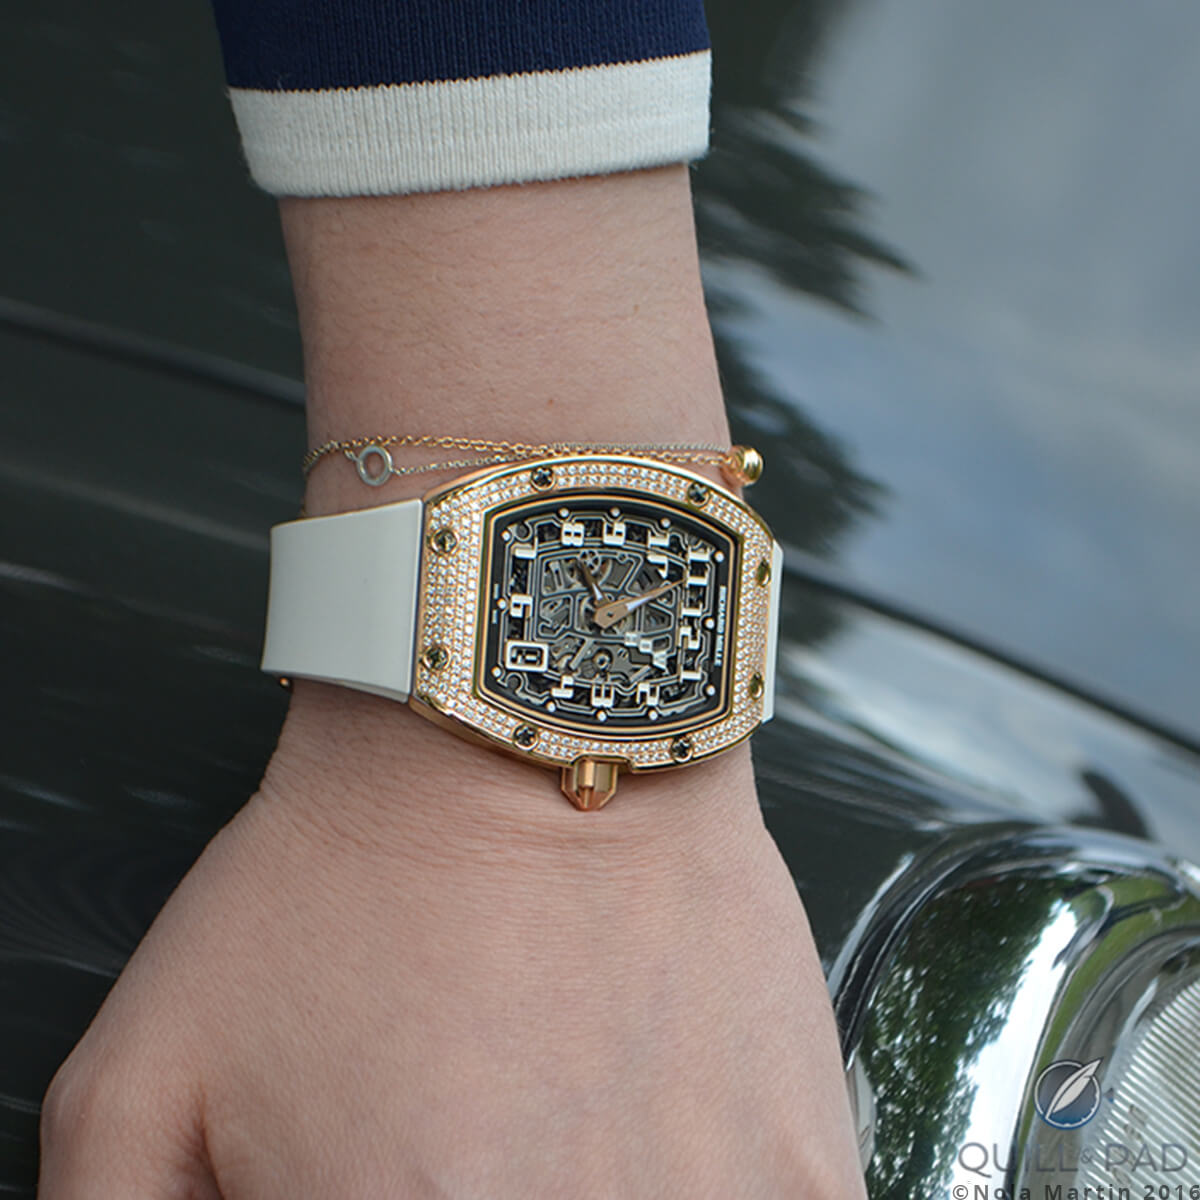 Richard Mille diamond-set RM 67-01 Extra Flat at home on the wrist during the 2016 Rallye des Princesses